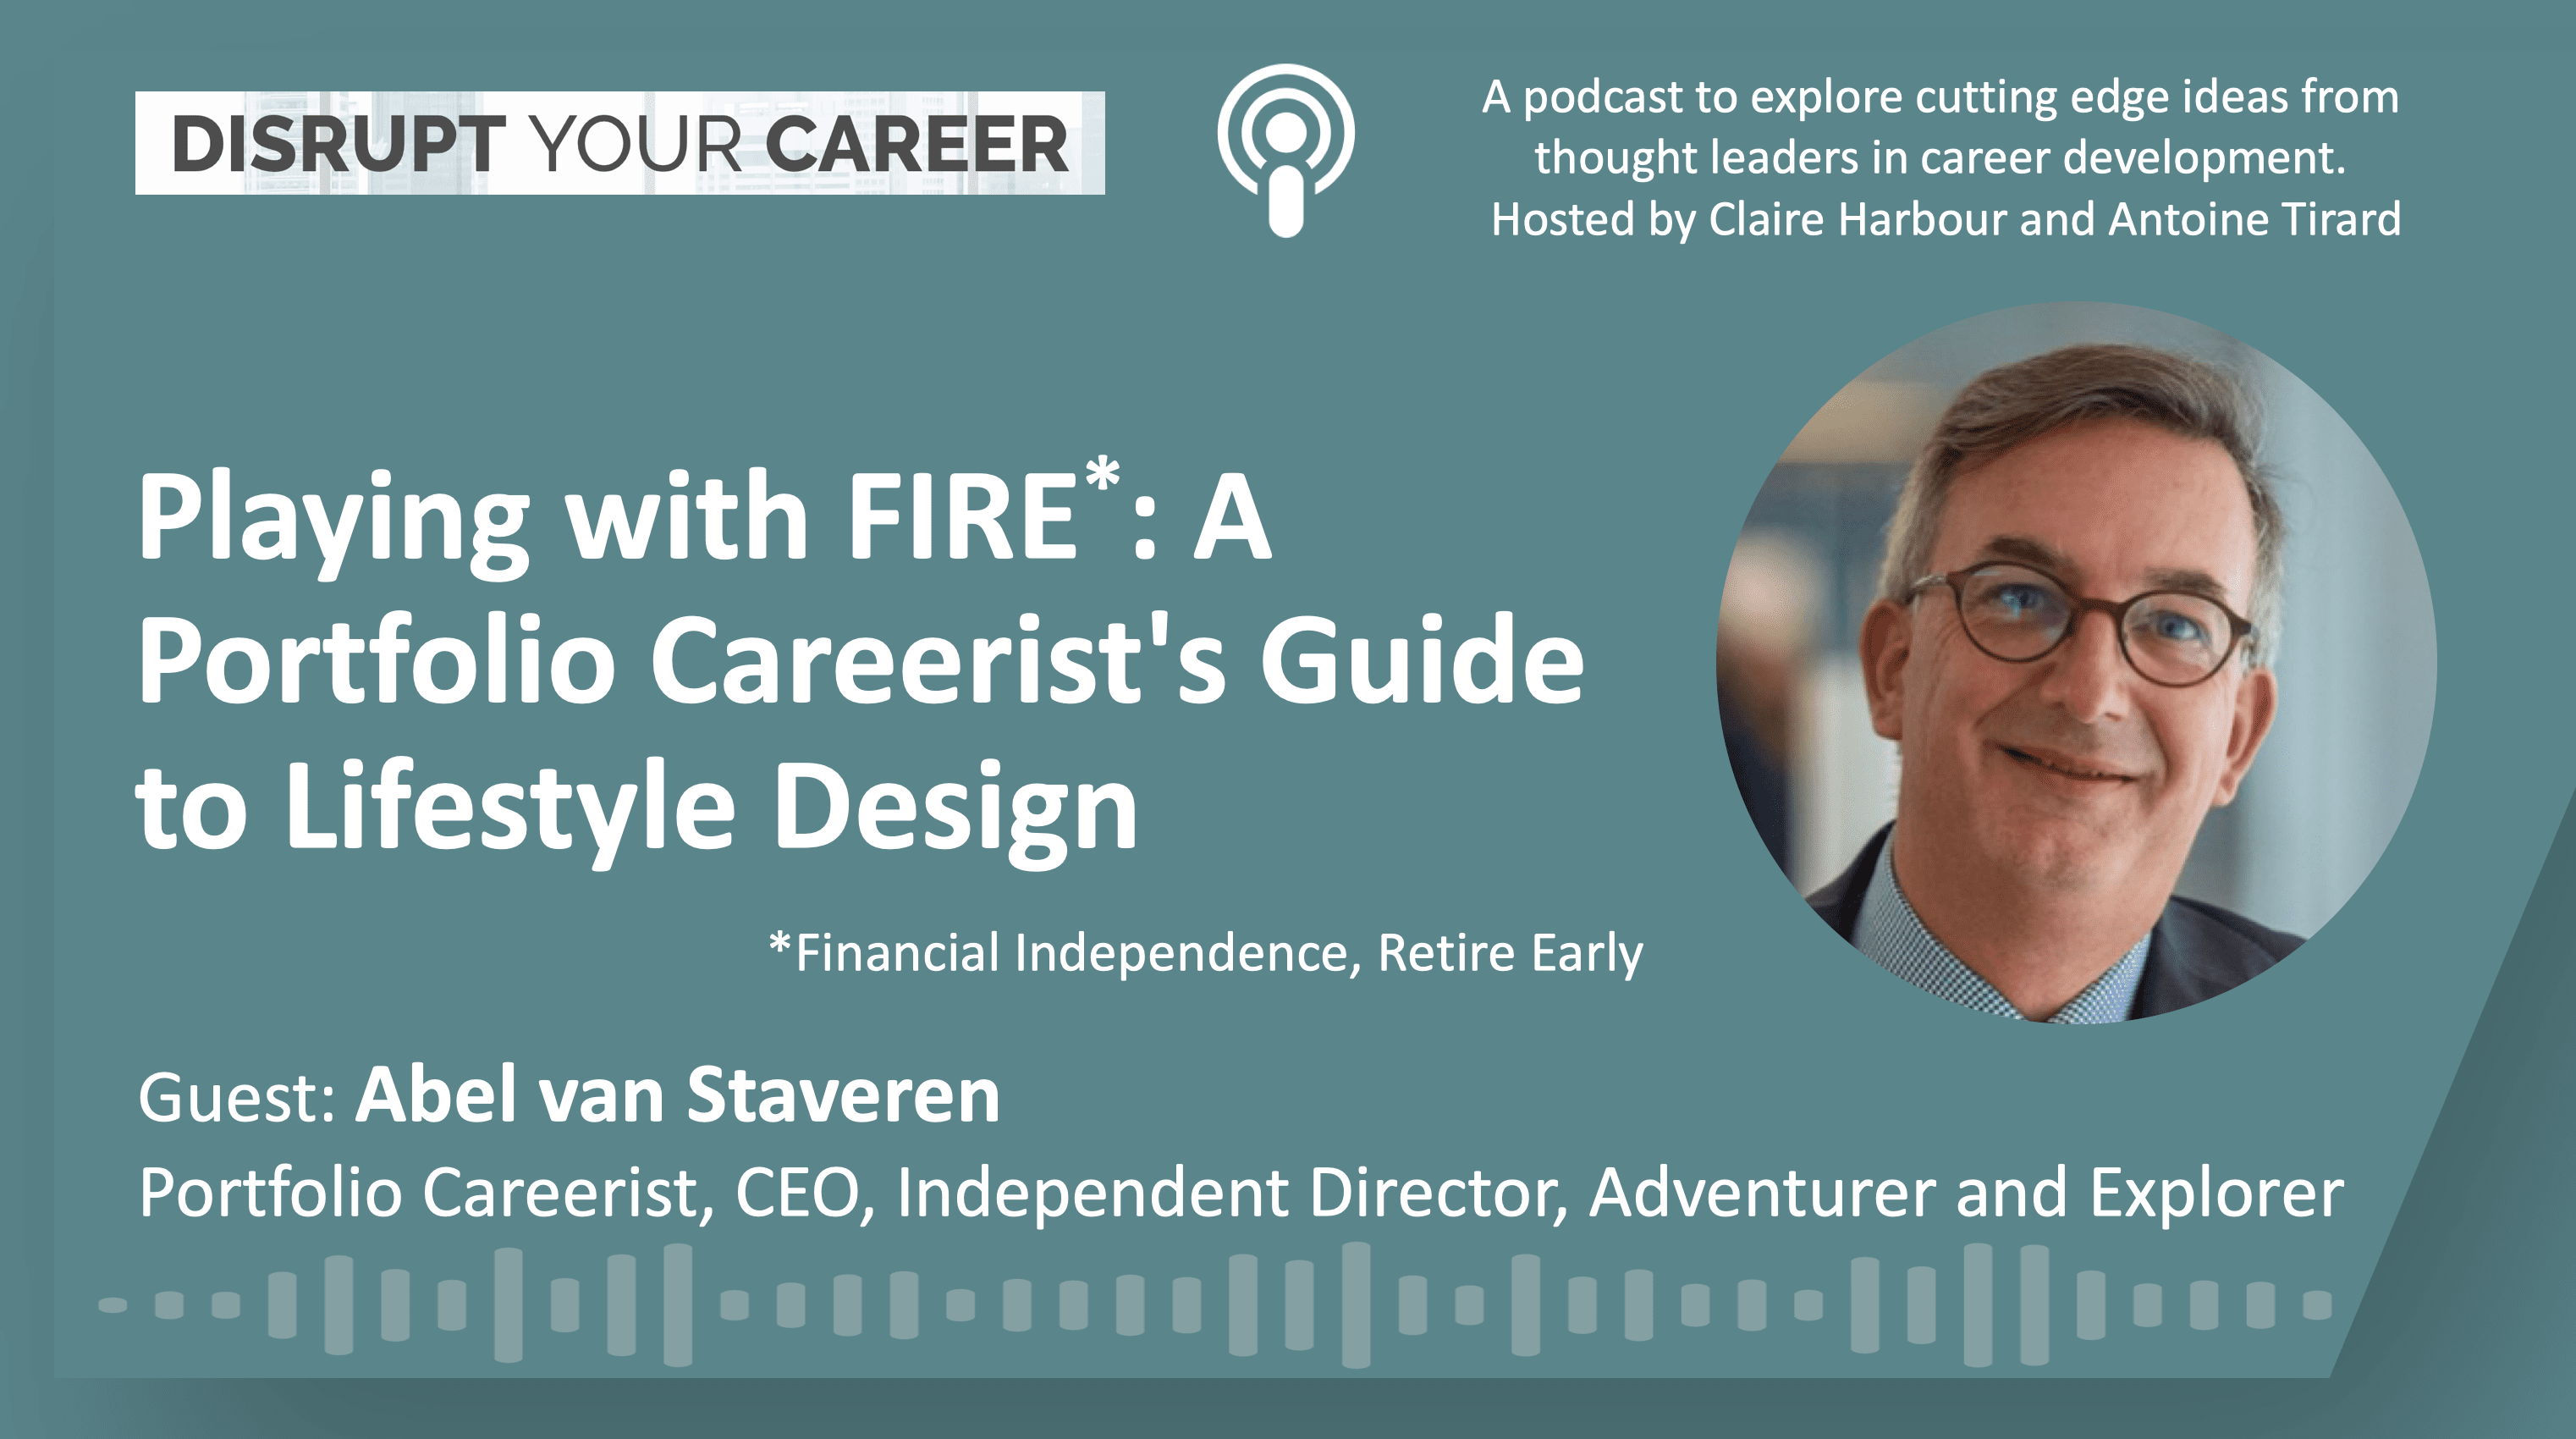 Playing with FIRE: A Portfolio Careerist’s Guide to Lifestyle Design